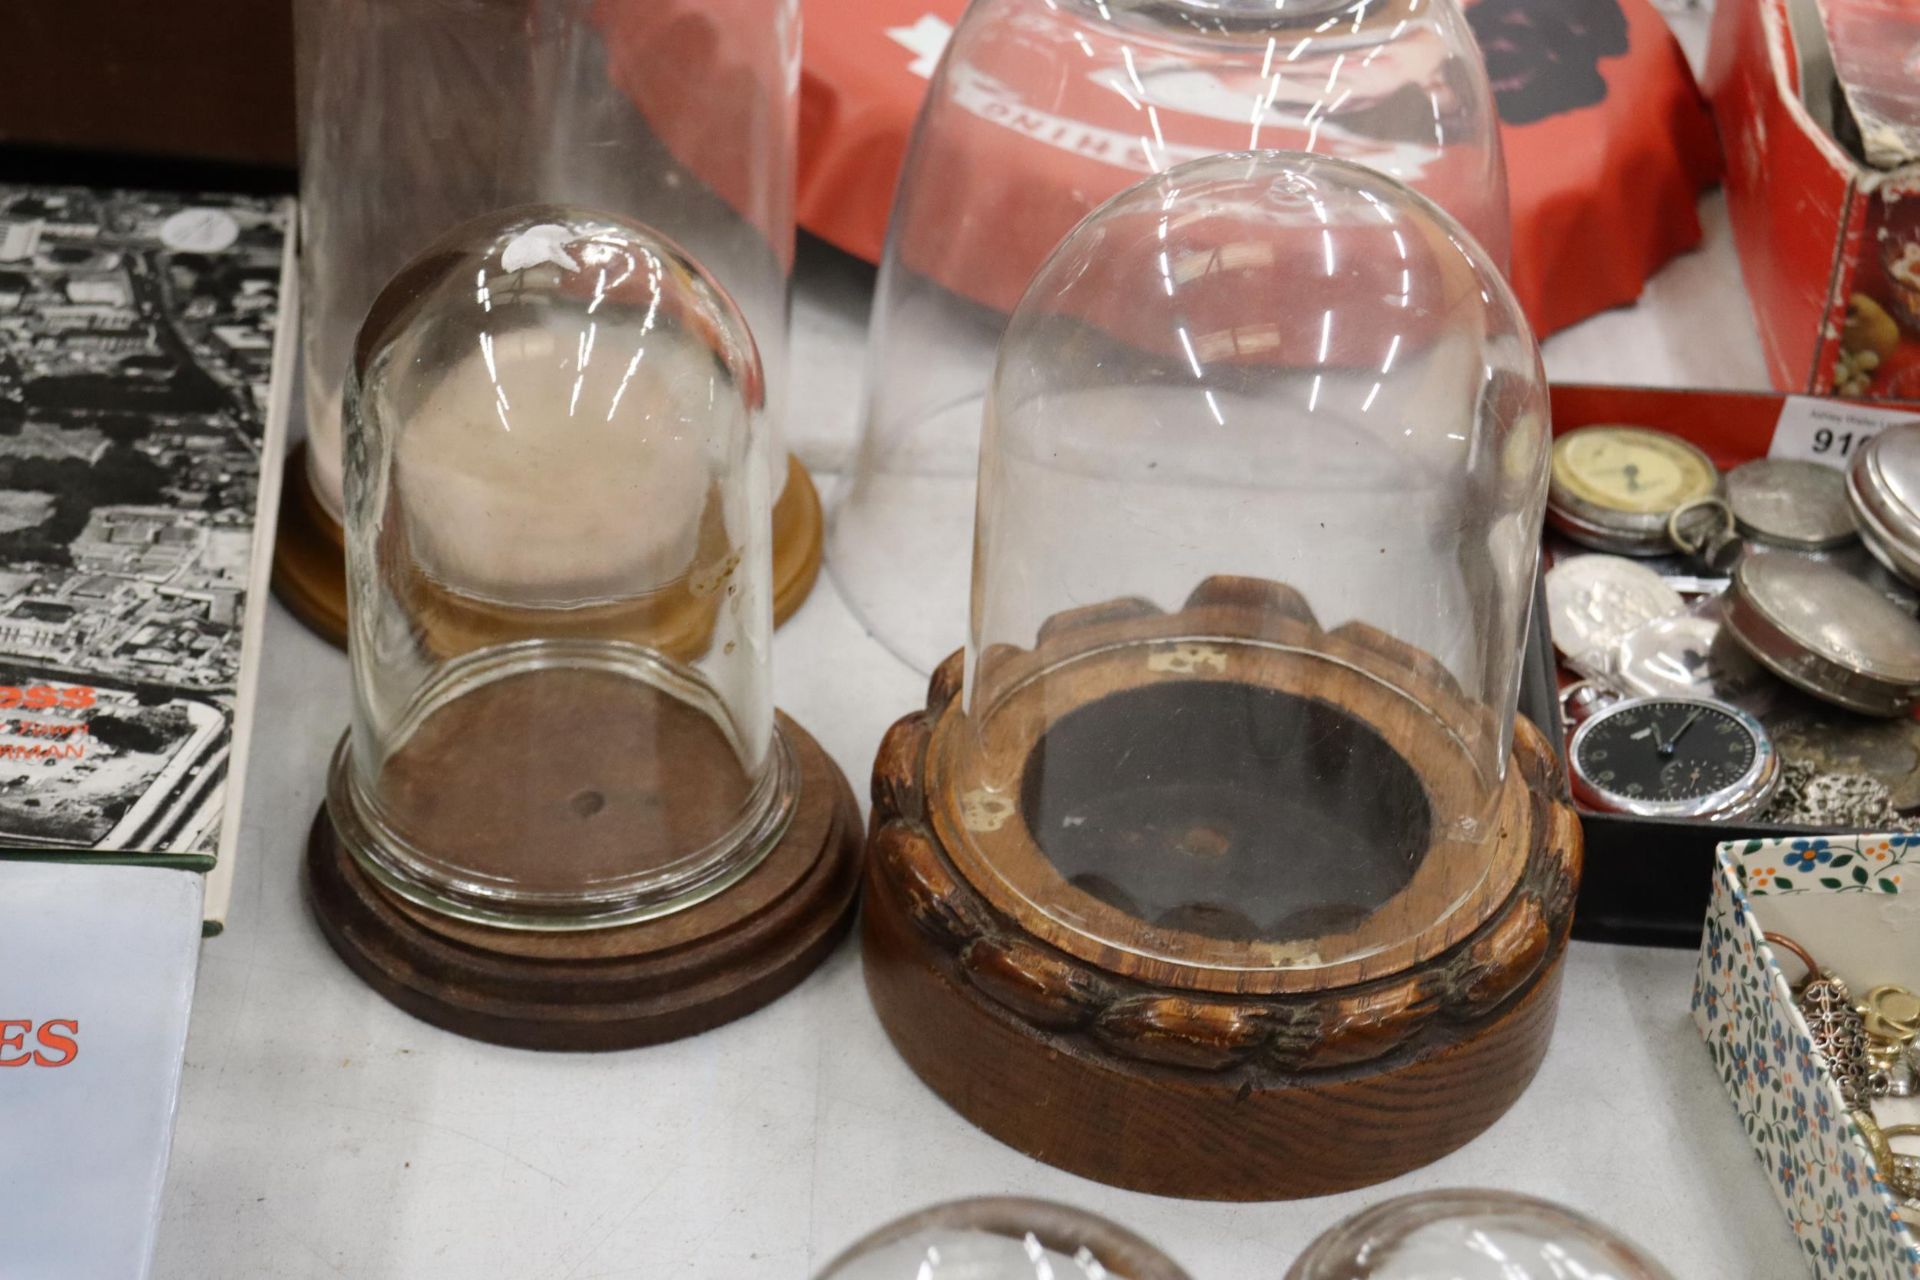 SIX DISPLAY DOMES AND FOUR BASES, FOUR GLASS AND TWO PLASTIC - Image 5 of 6